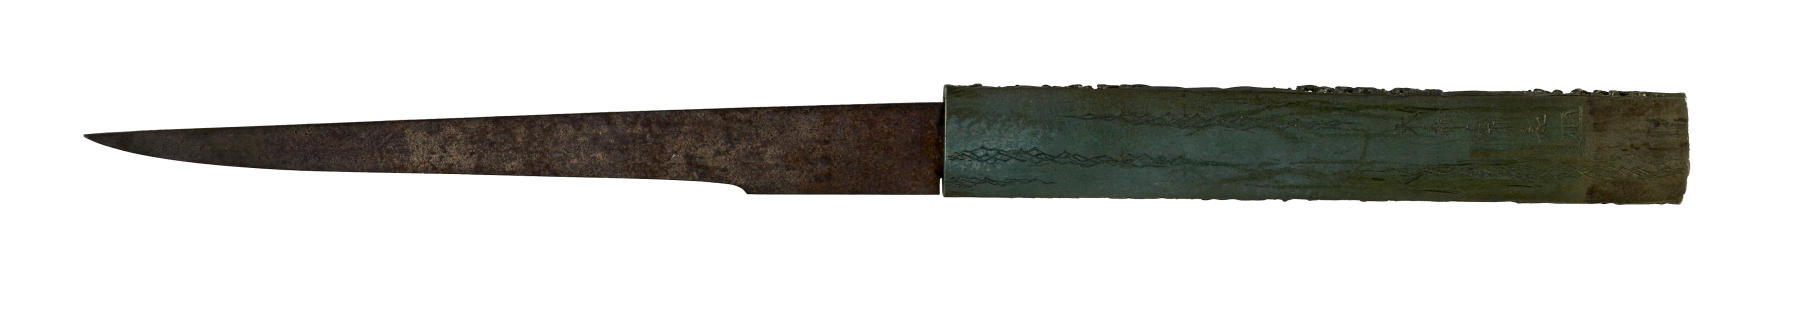 Image for Kozuka with Fish and Waves